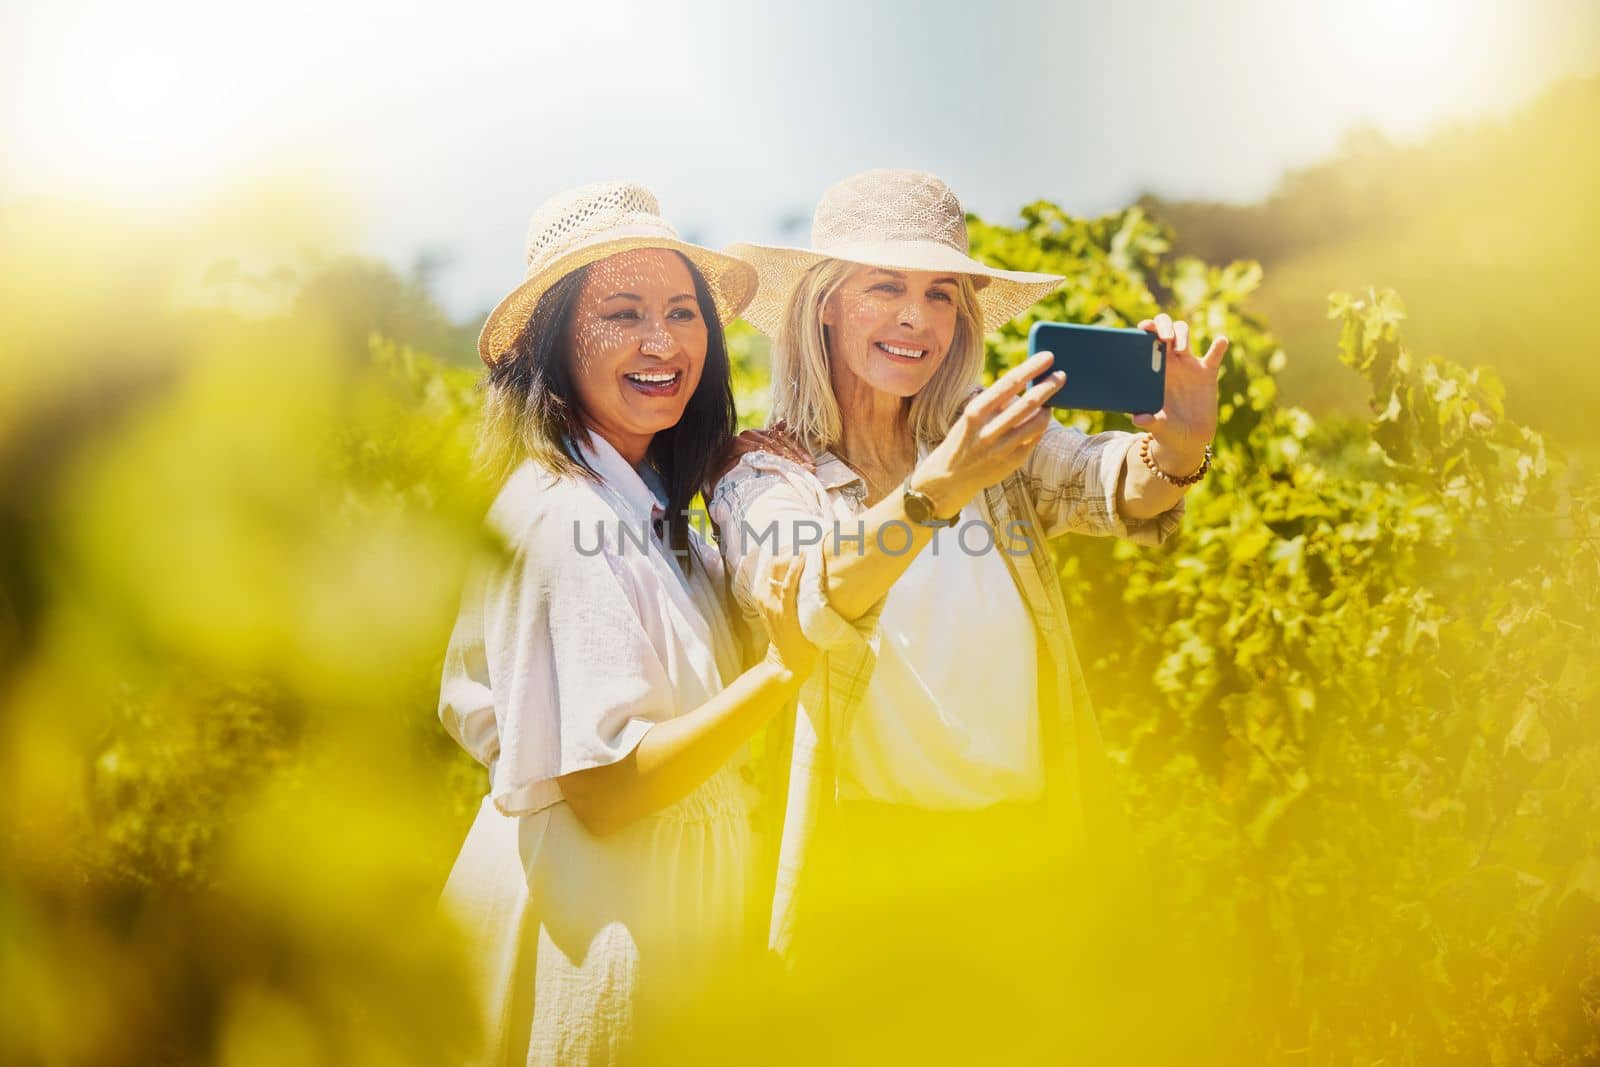 Two happy friends taking selfies on cellphone in vineyard. Smiling Caucasian and mixed race women standing together and bonding during day on wine farm while taking pictures for social media on phone.